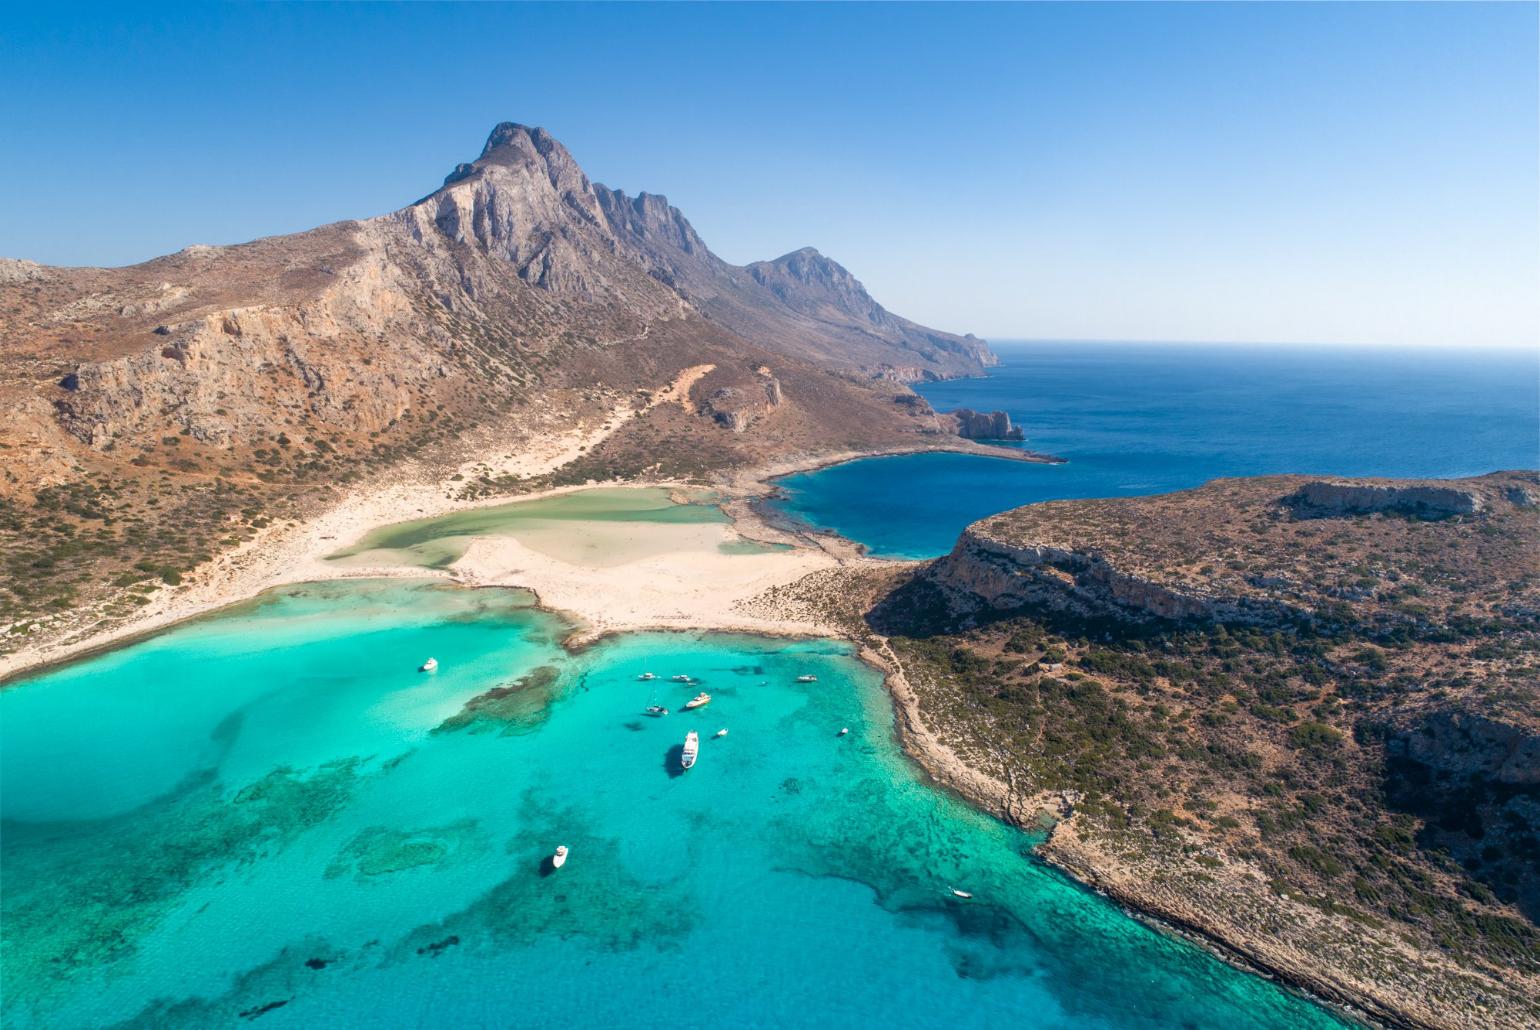 Balos Beach - a great day trip from Souday Bay View